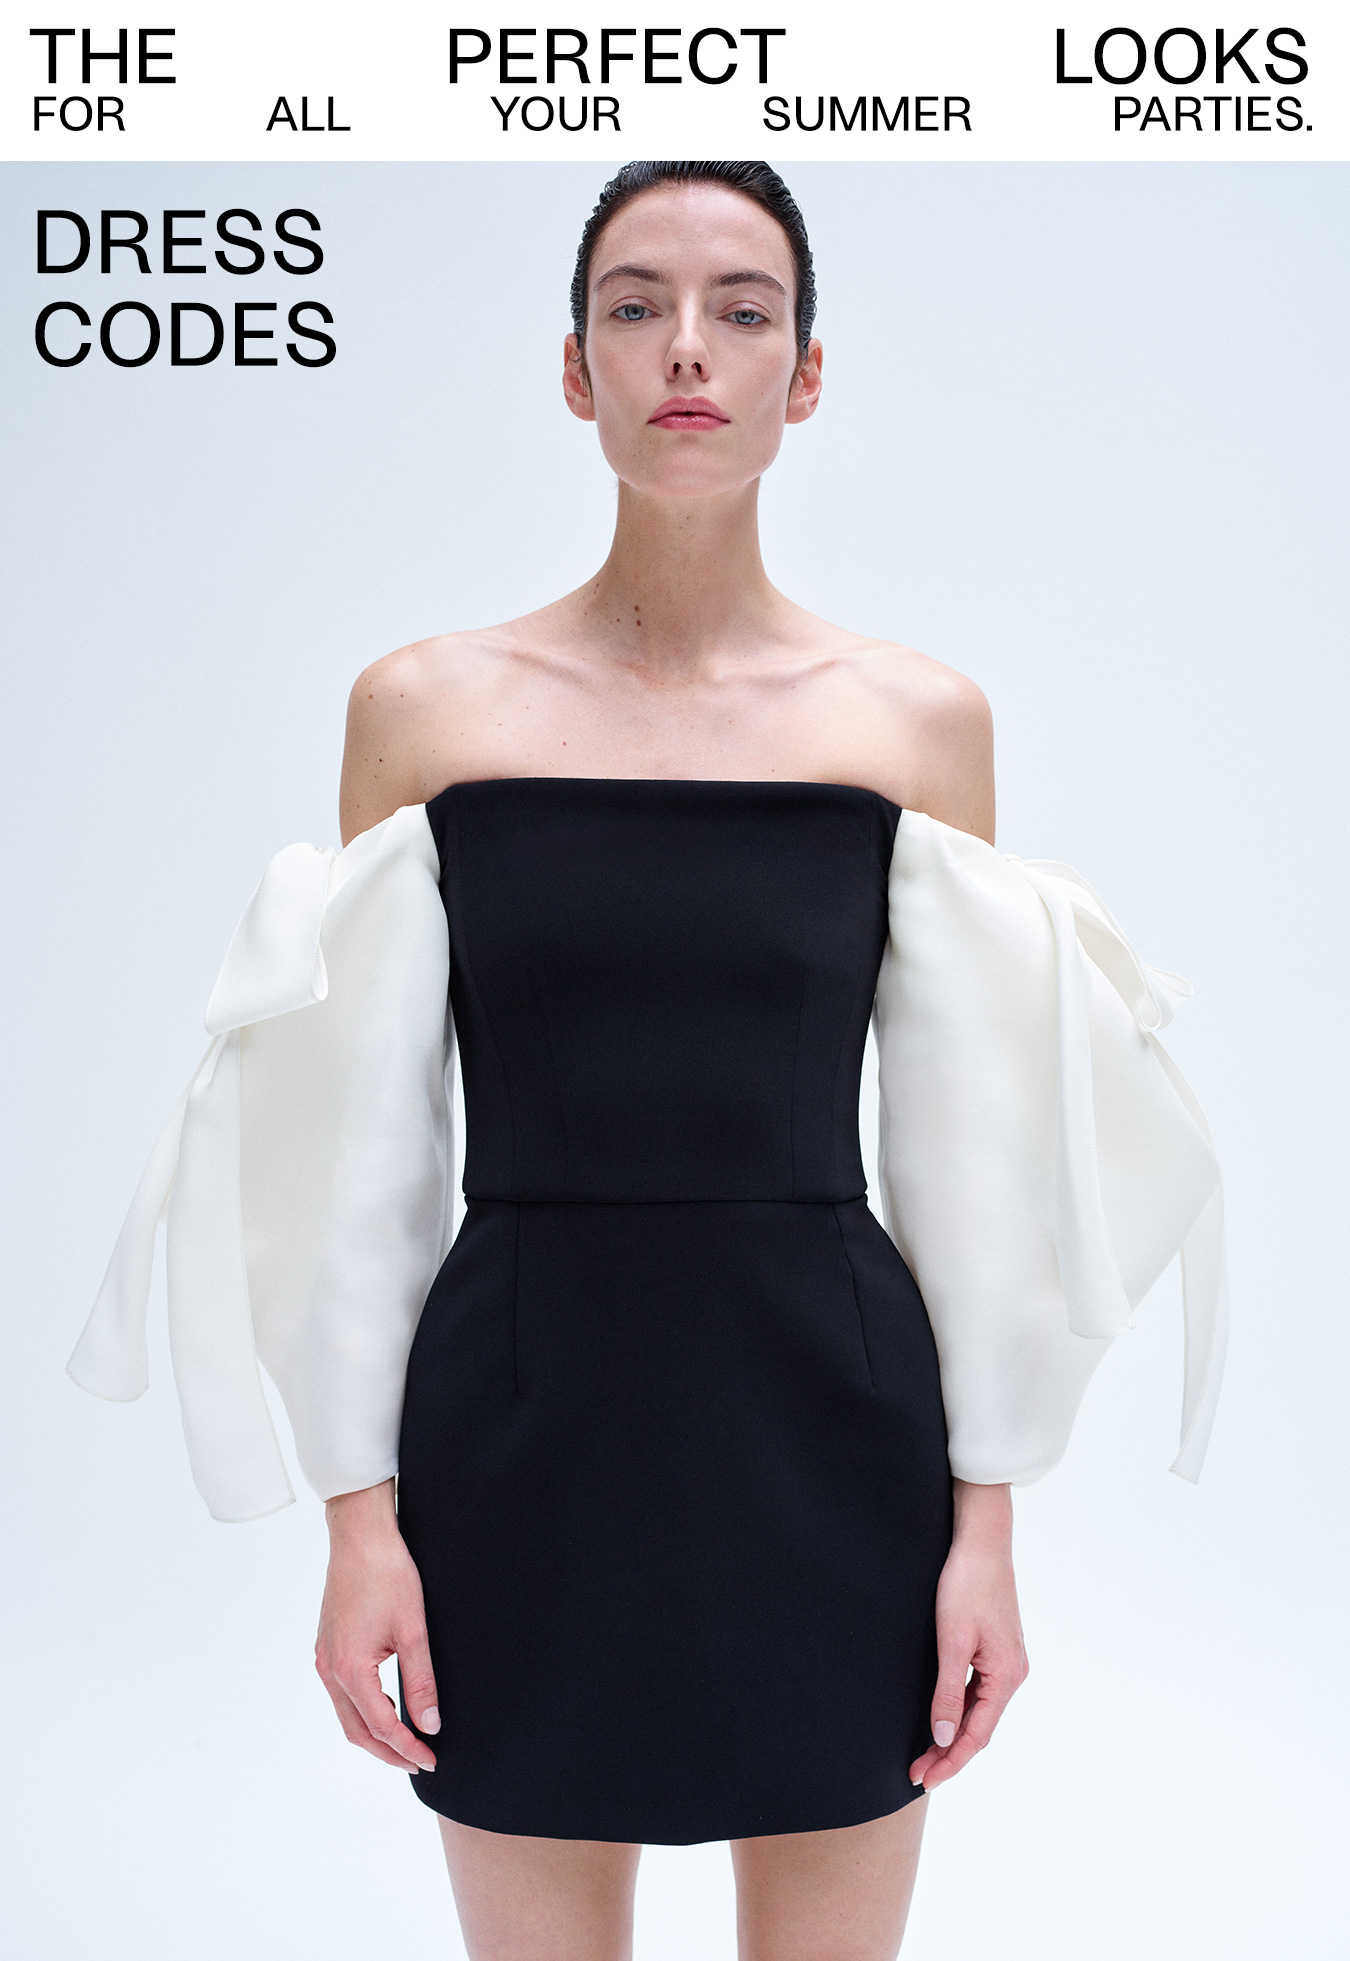 Dress Codes - The perfect looks for all your summer parties.; Model wears Carolina Herrera - Off-Shoulder Mini Dress with Draped Bow Sleeves